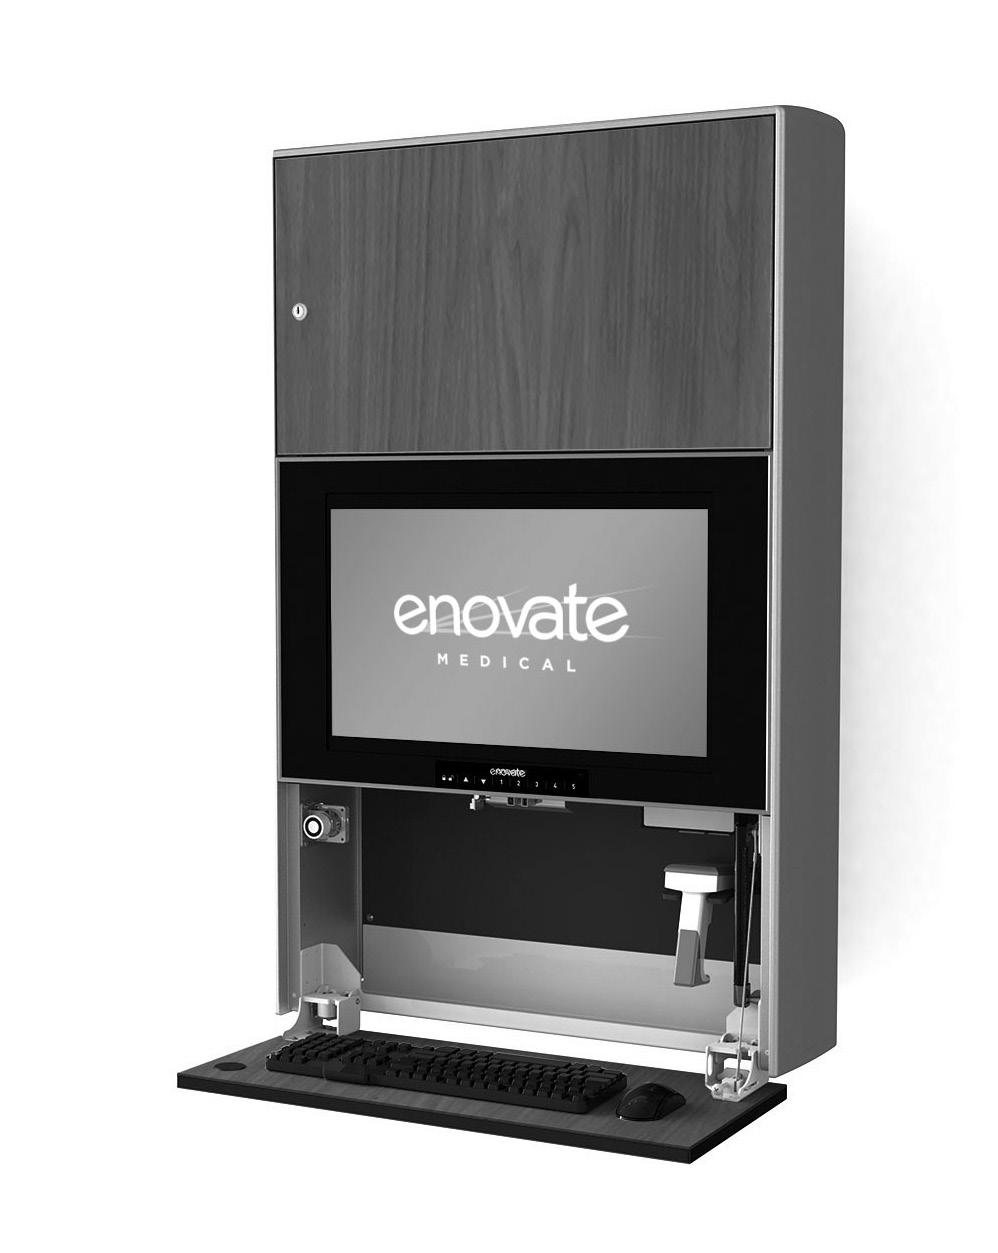 The Enovate Medical e750 Wallstation was designed to set a new standard in quality.